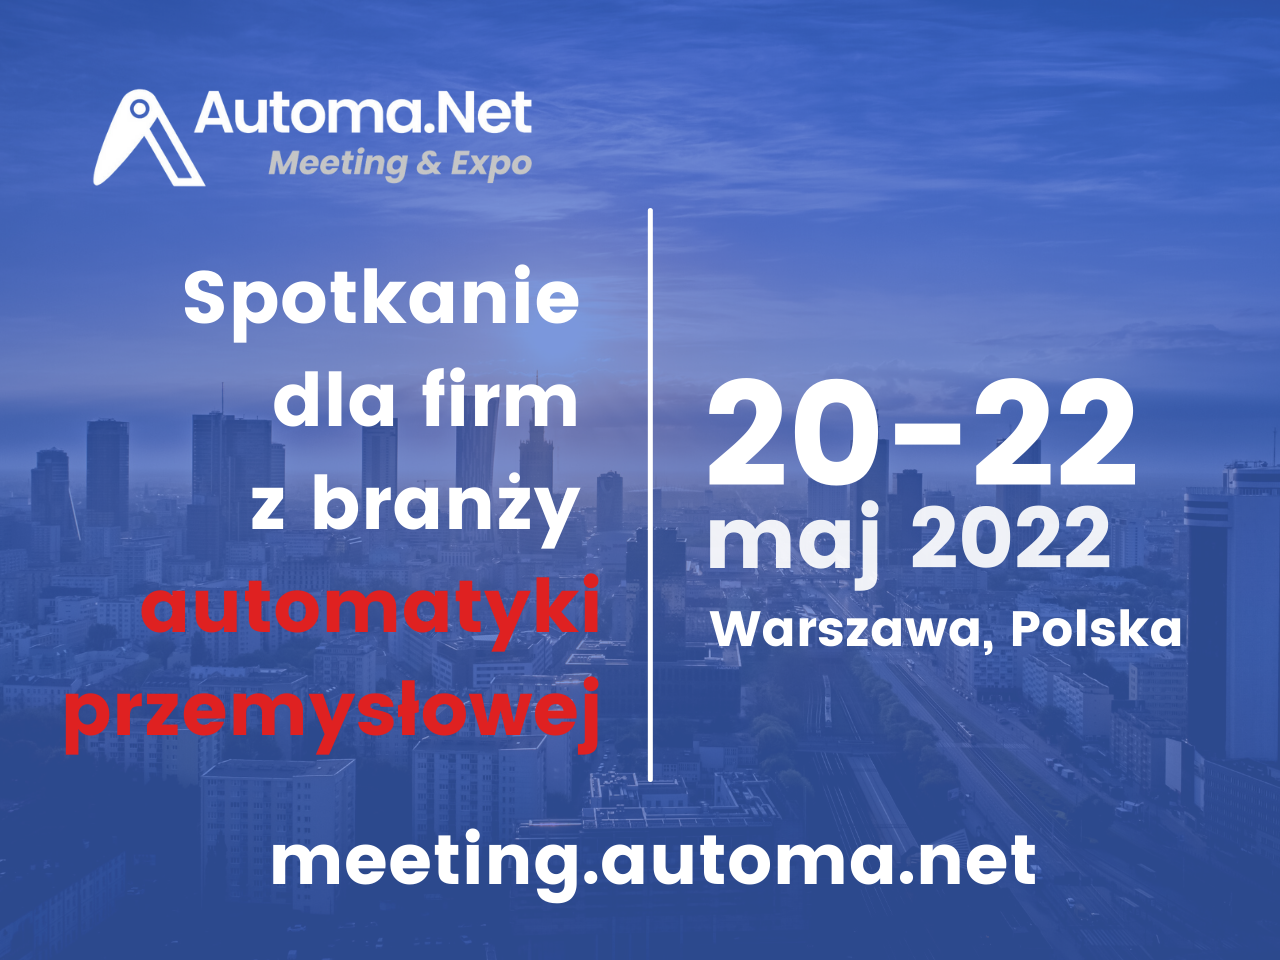 automanet meeting